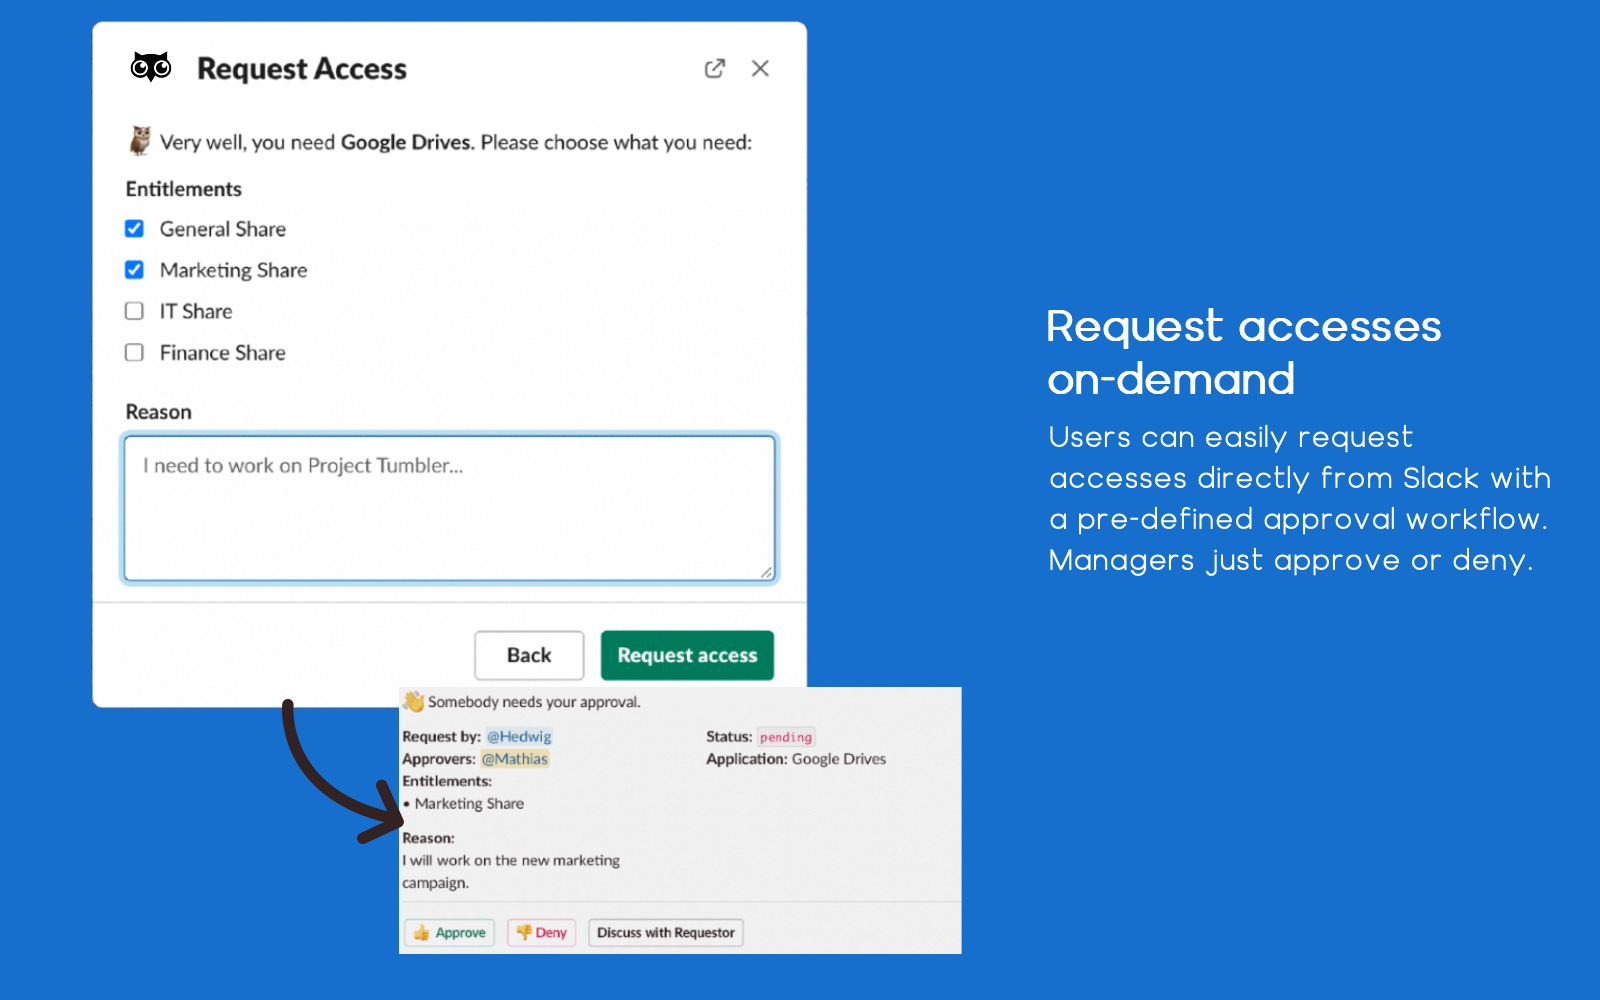 Request accesses on-demand